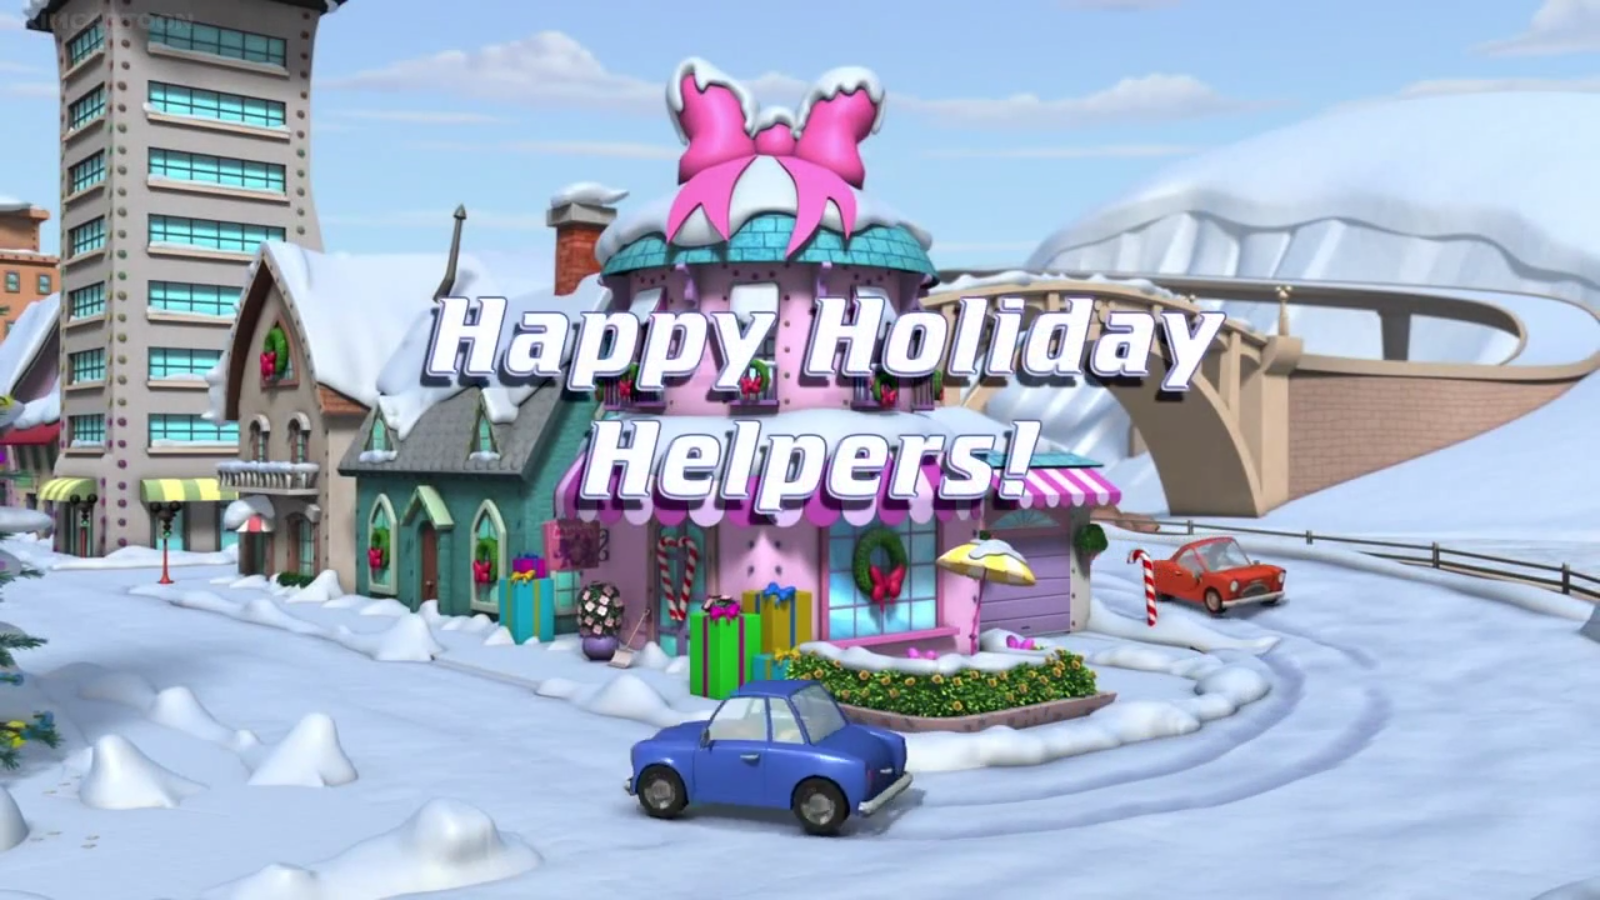 Happy Holiday Helpers!